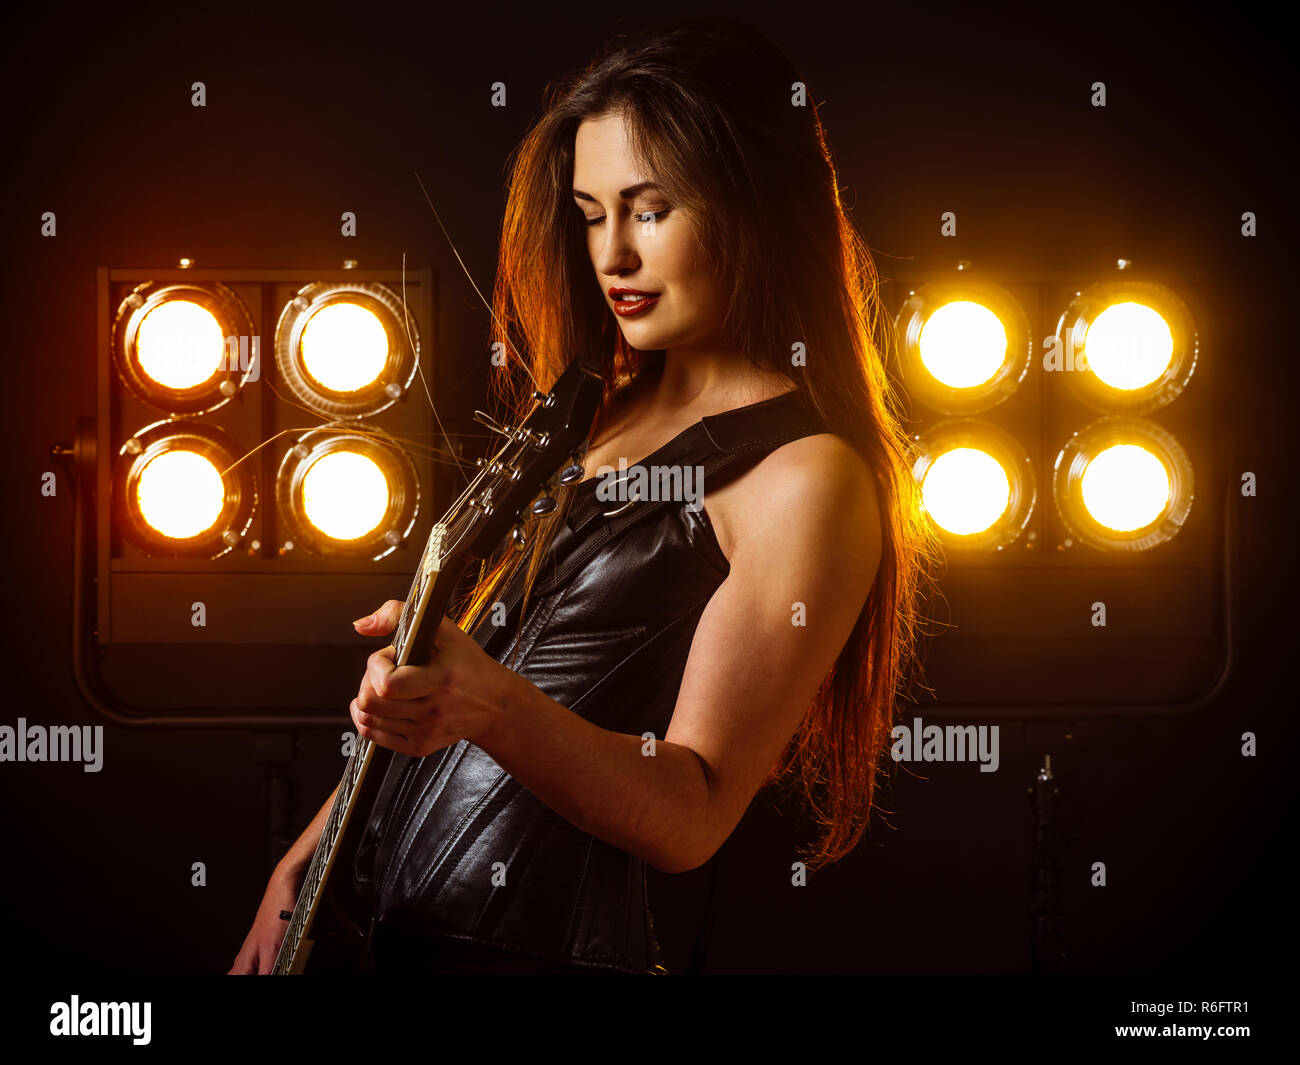 Sexy woman playing electric guitar on stage Stock Photo